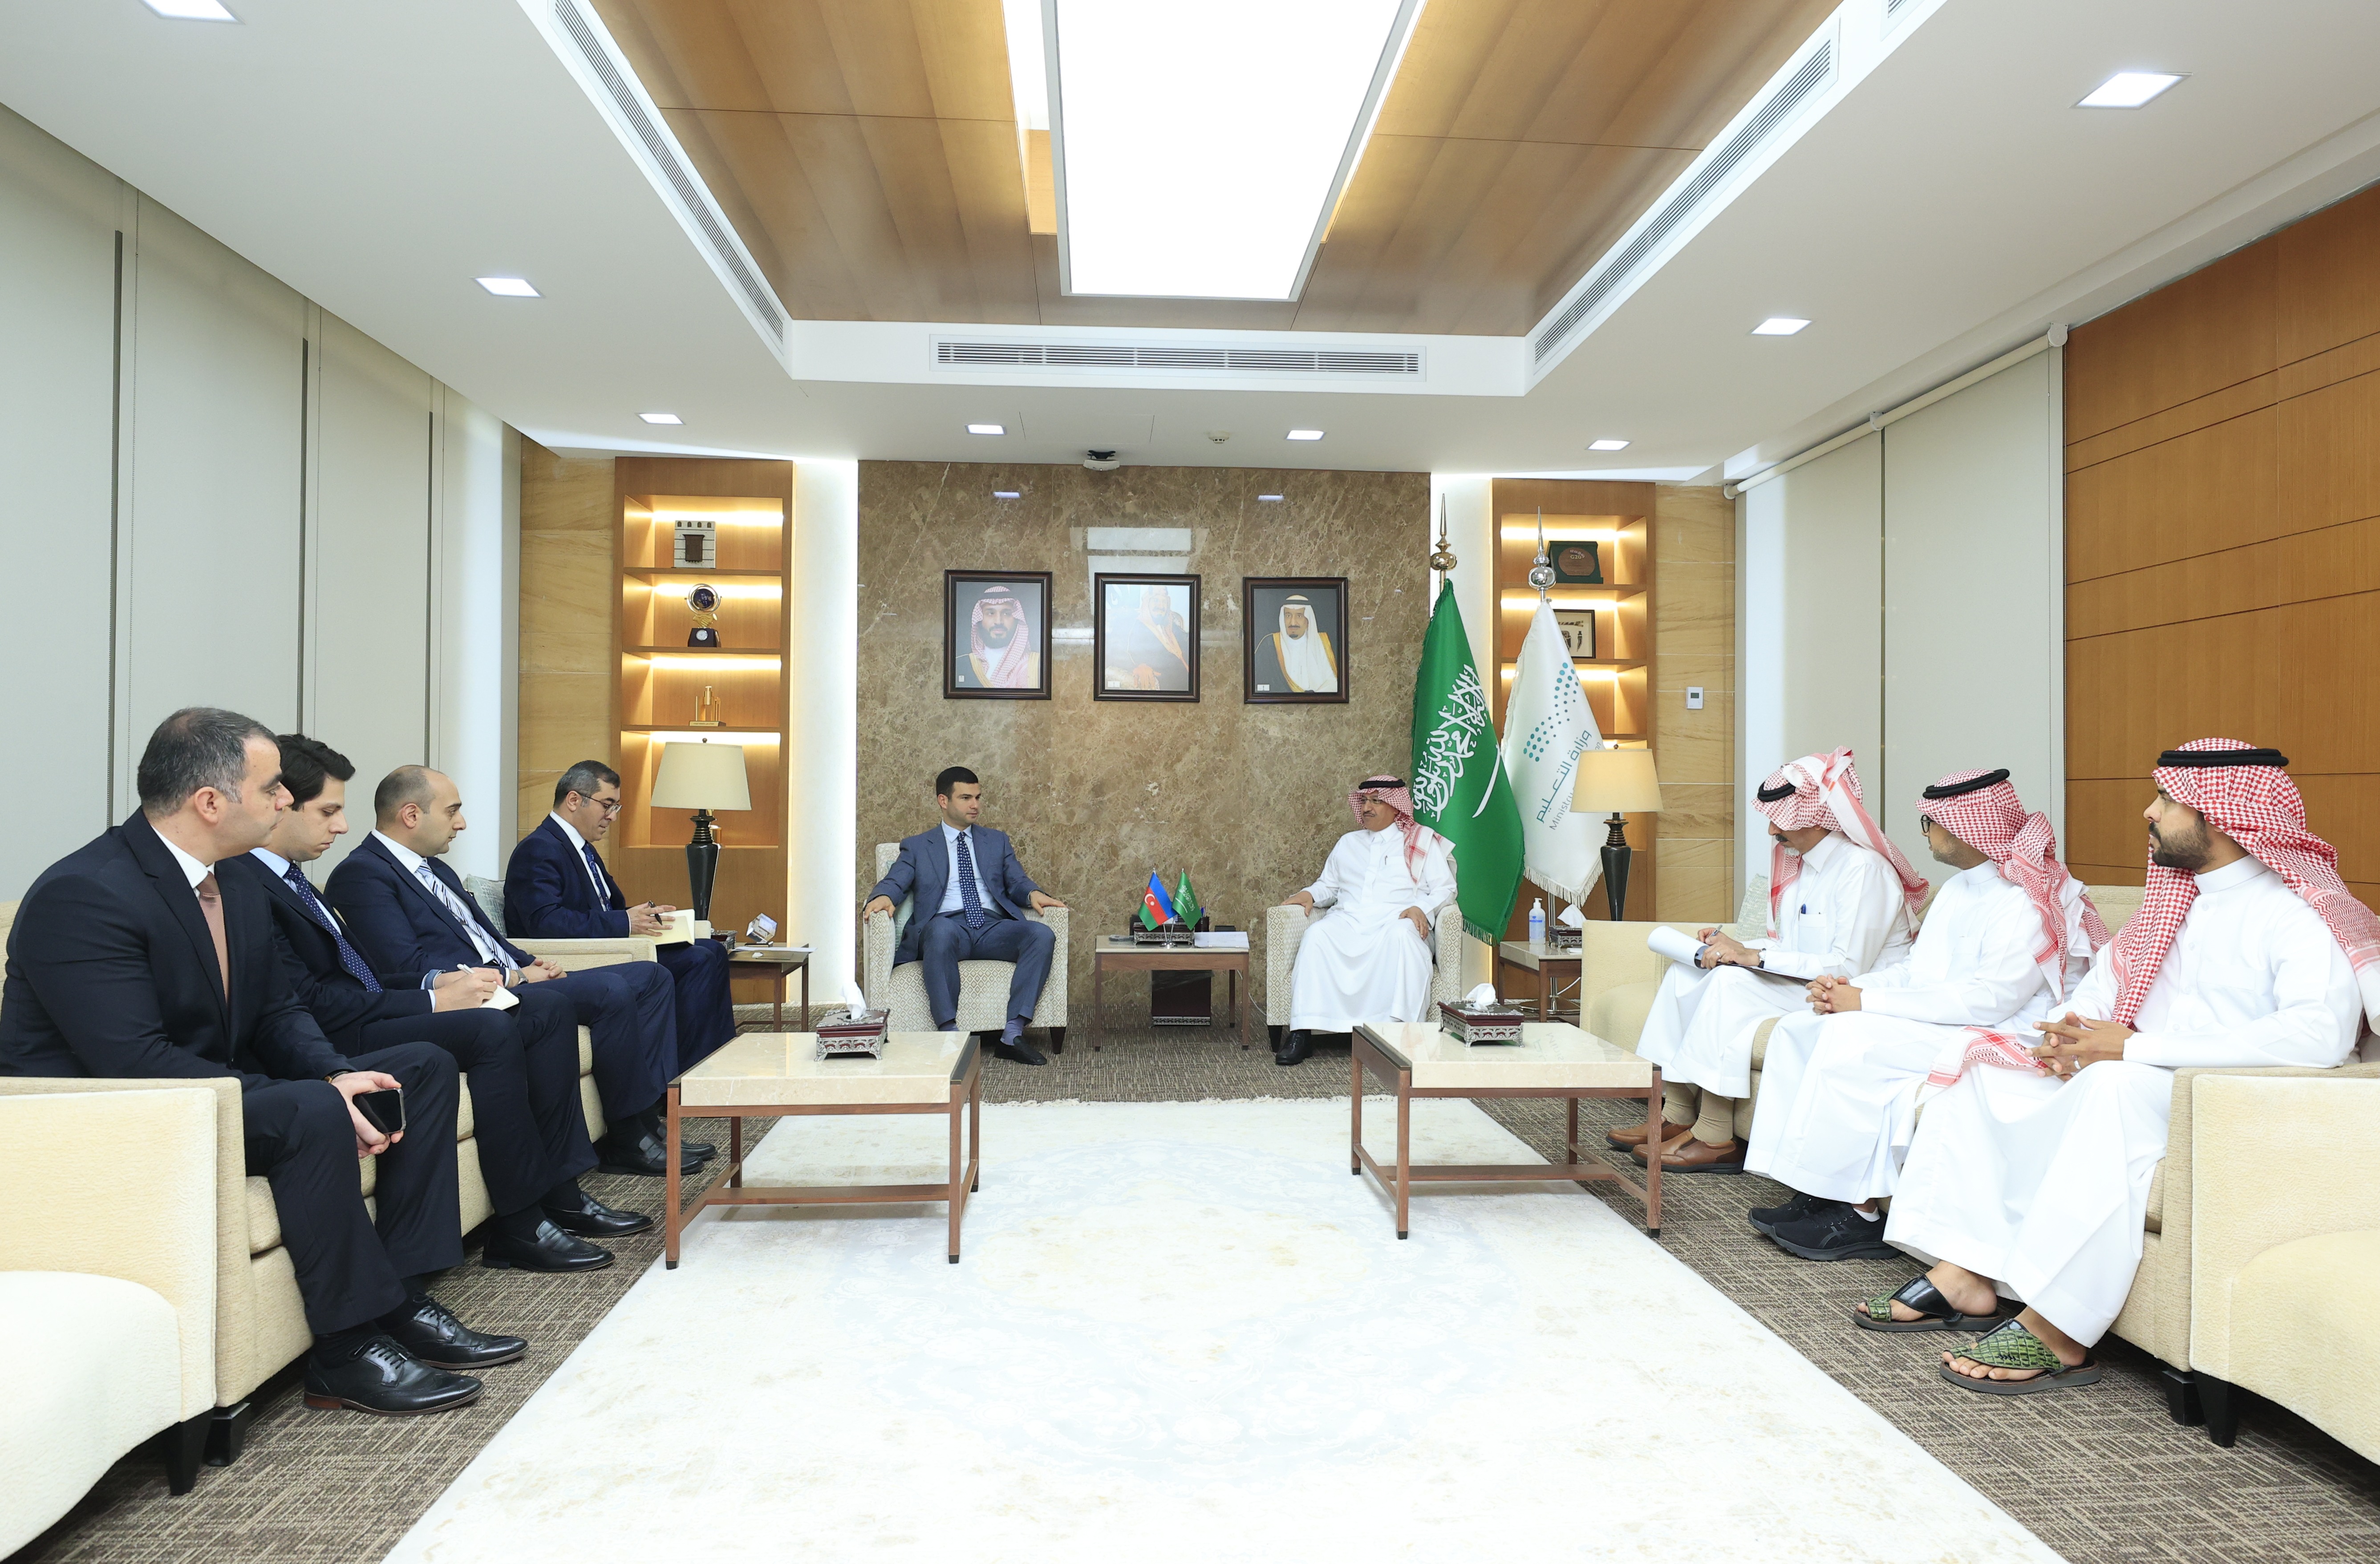 Meeting held between the Chairman of KOBİA and the Minister of Education of Saudi Arabia, the Chairman of SMB Bank 